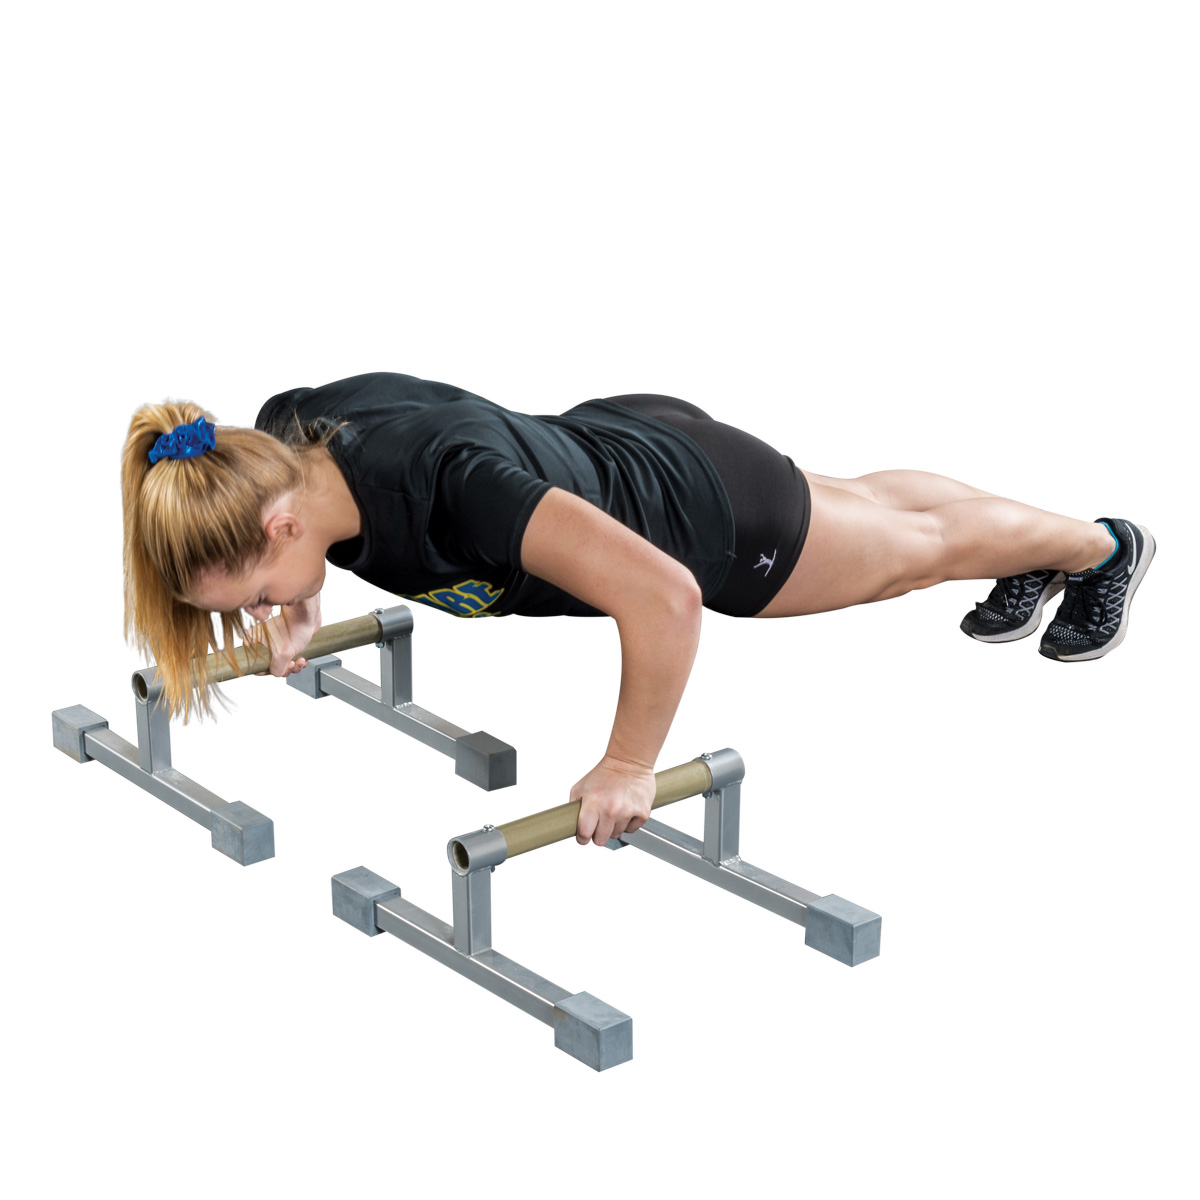 correct position for floor push up